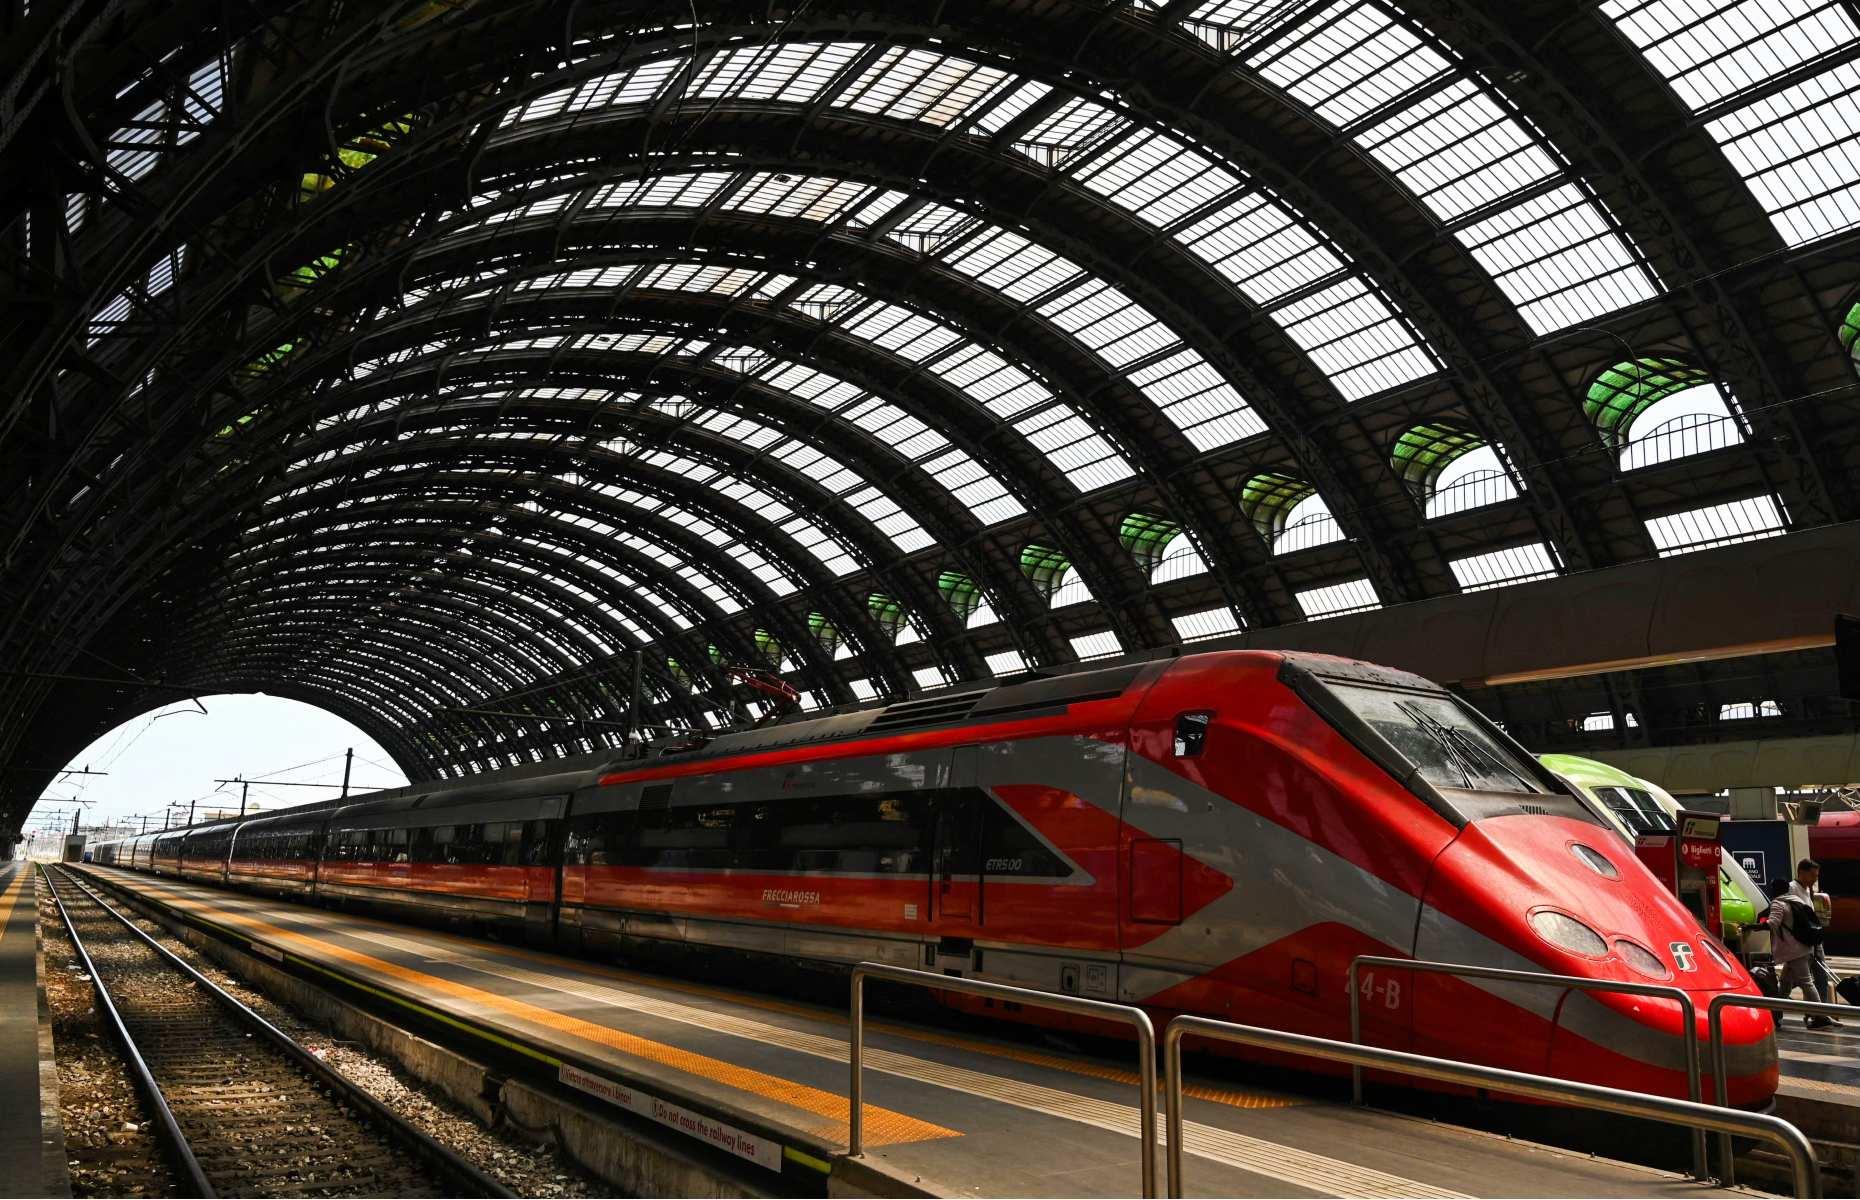 <p>Elsewhere, Trenitalia is in cahoots with Slovenia’s transport services to start a high-speed rail route from Milan (pictured) to Ljubljana, Slovenia’s gorgeously green capital. The two-and-a-half-hour trip between the two cities could open to passengers as soon as April 2024. Later this year, the zippy Frecciarossa trains will also tread through Paris, Madrid and Barcelona, as Trenitalia looks to increase its presence in France and Spain. This will be a boon to travellers crossing the Pyrenees, which has historically been low on rail services.</p>